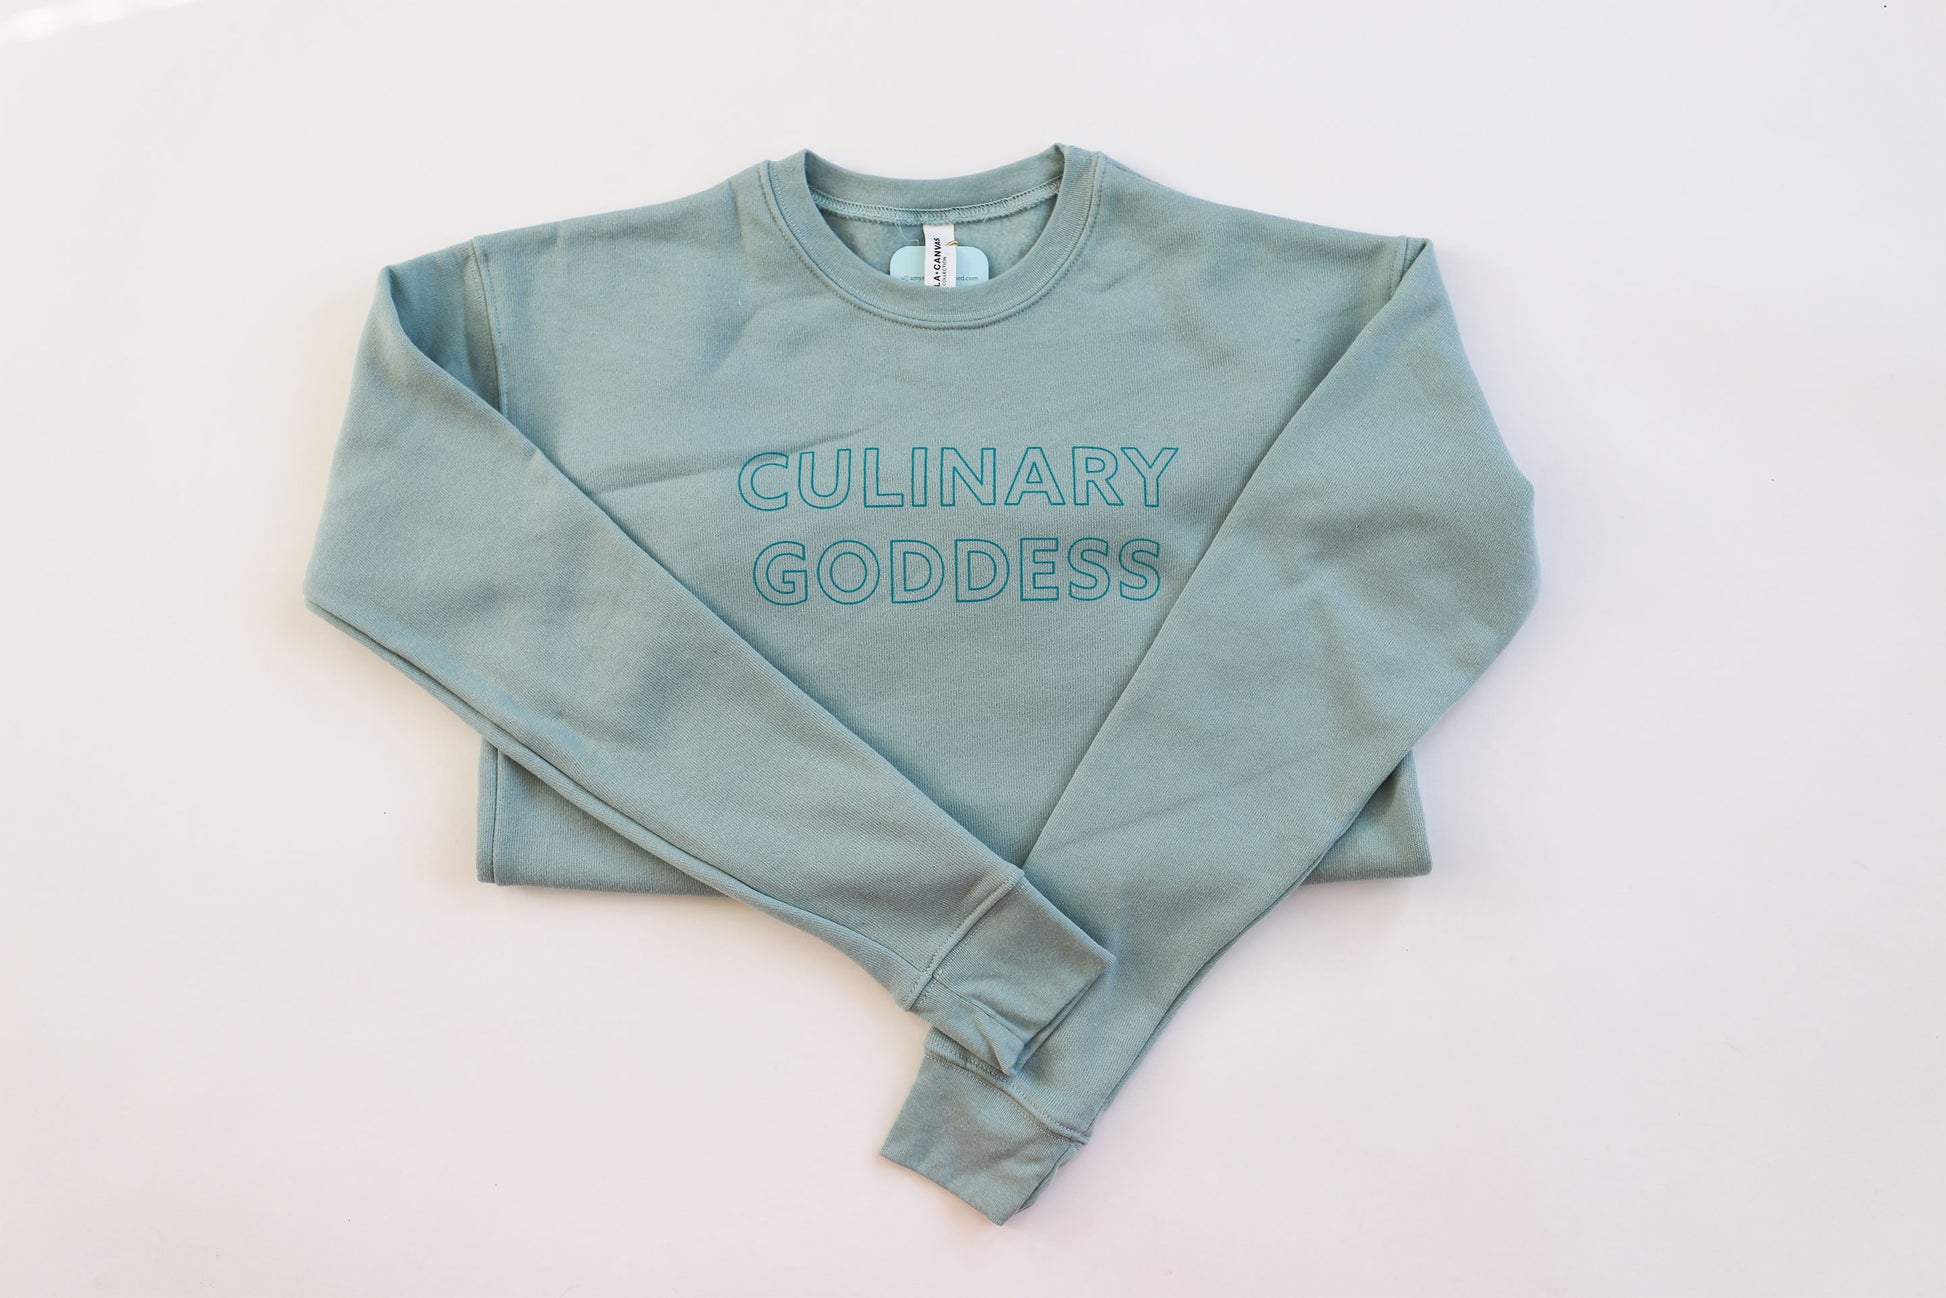 Dusty blue crewneck sweatshirt with teal block lettering that says "Culinary Goddess"